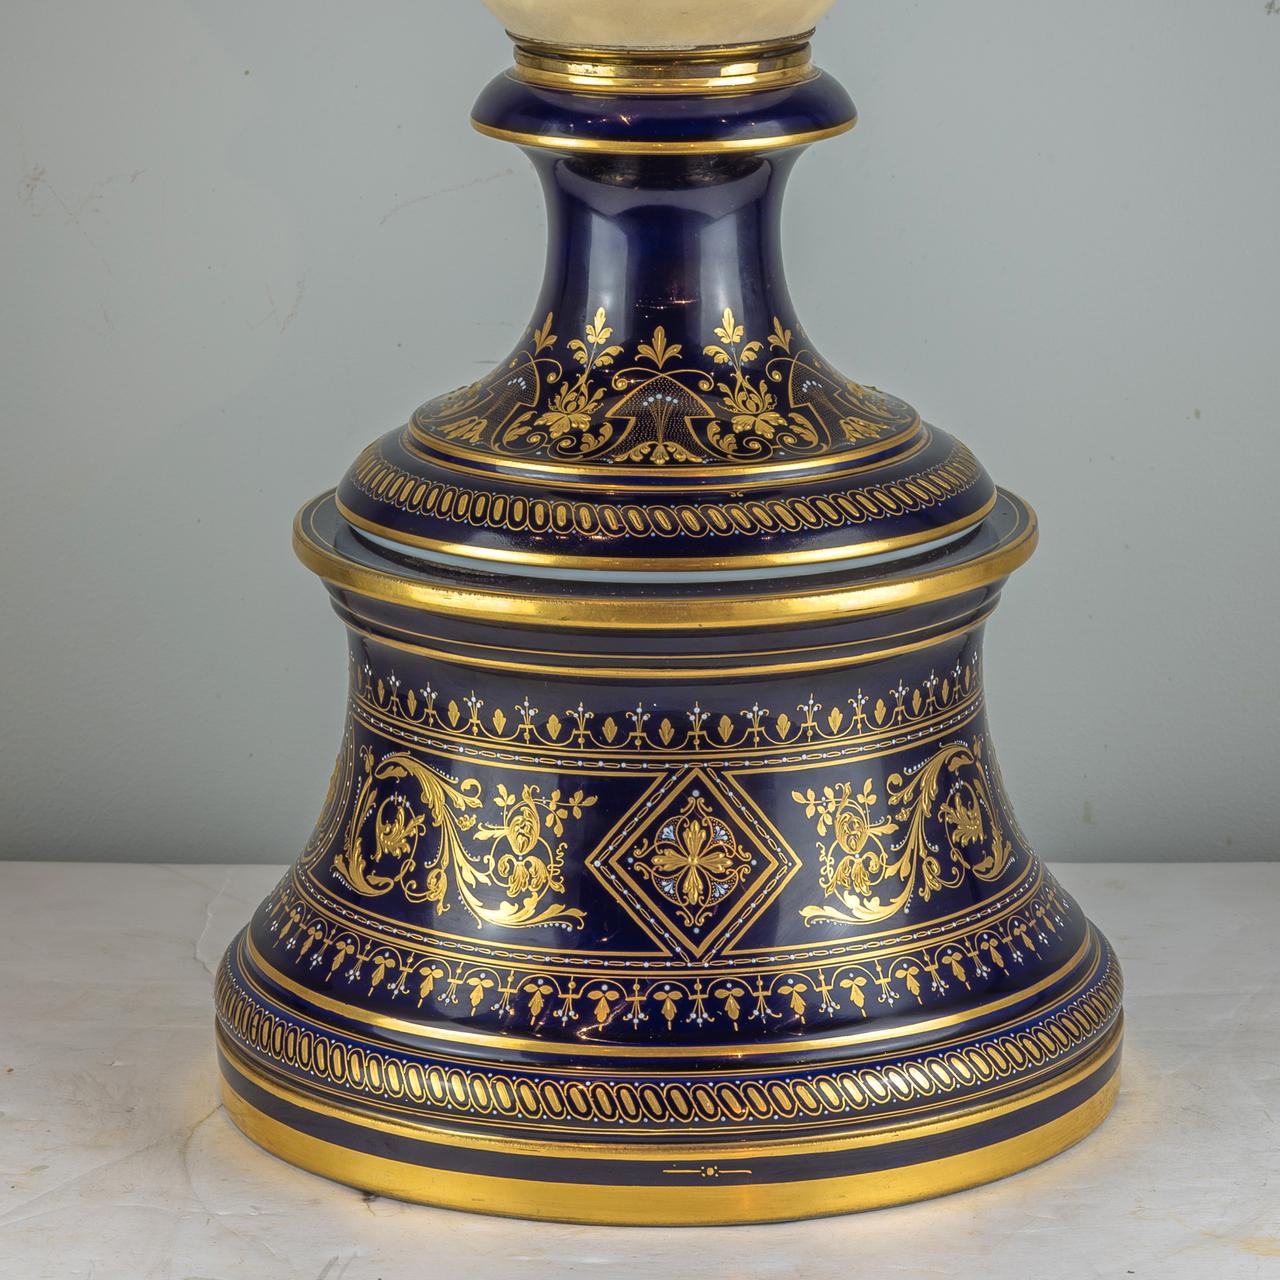 Stunning Large Royal Vienna-Style Painted Porcelain Covered Urns For Sale 3